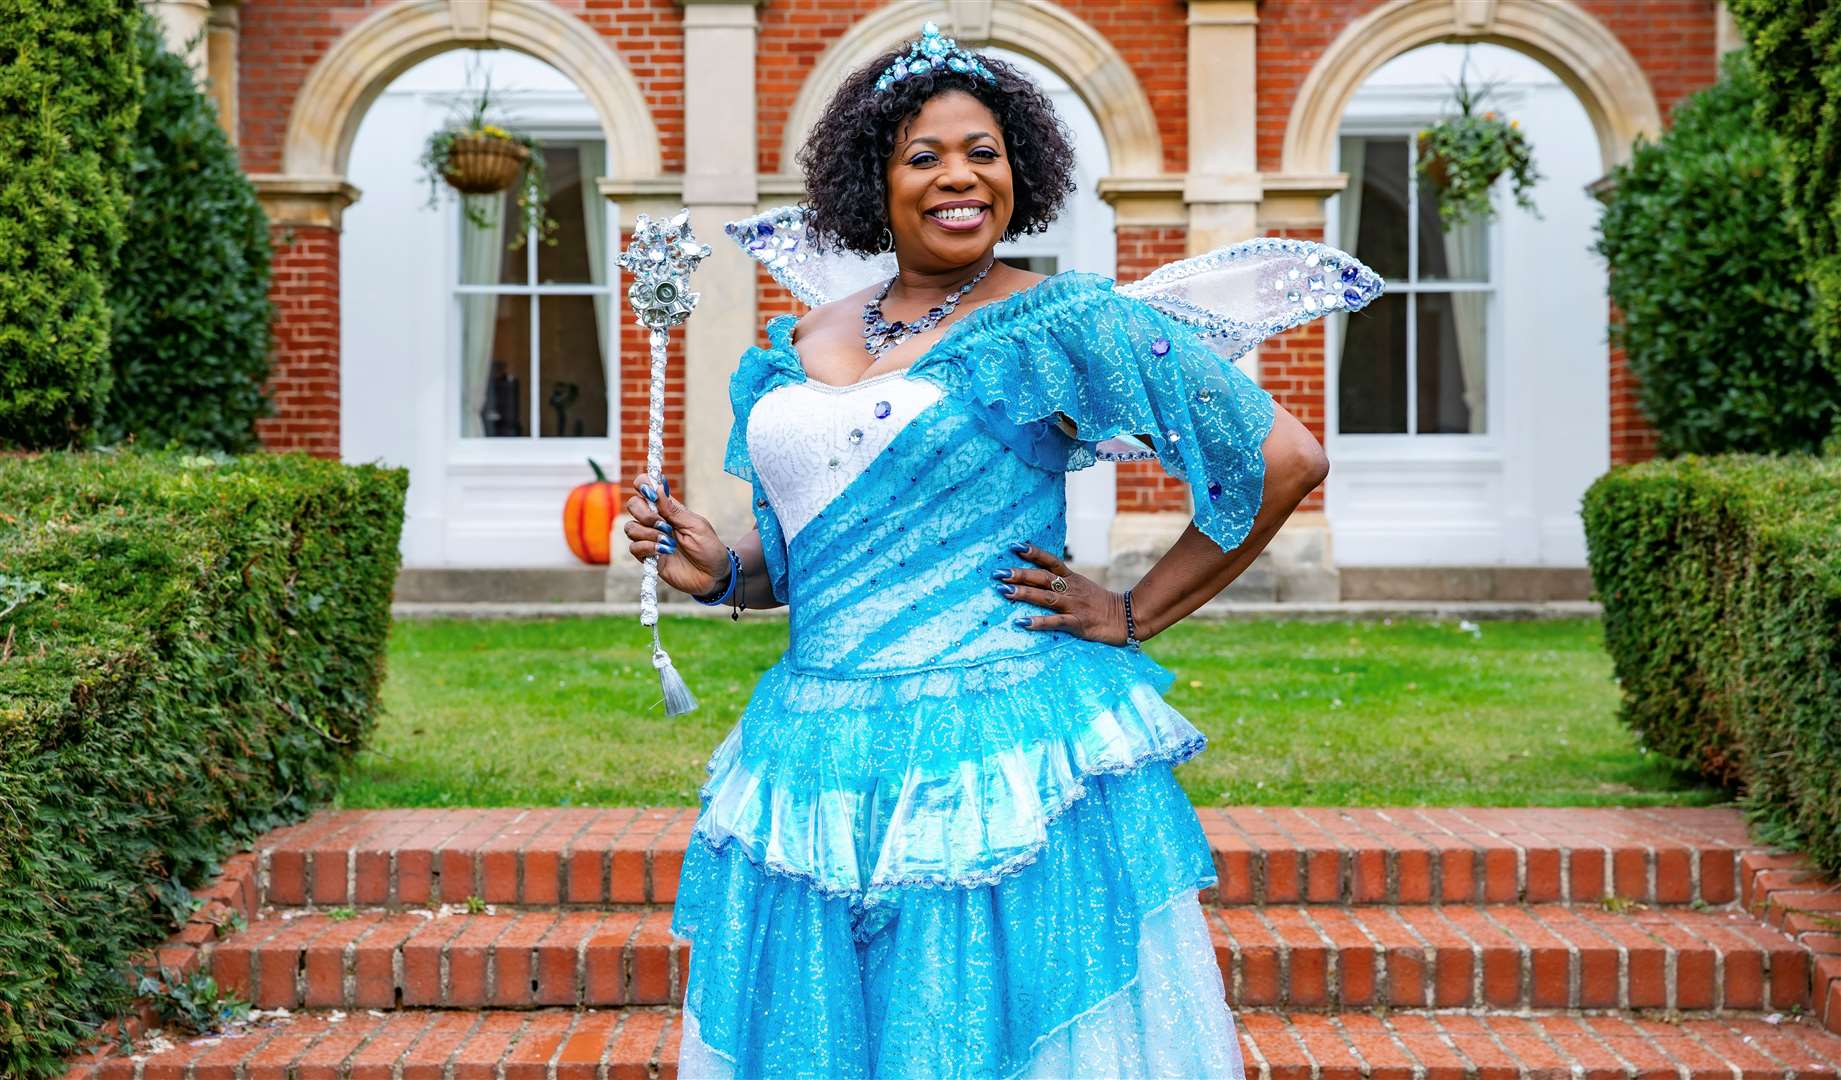 Loose Women star Brenda Edwards will appear as the Fairy Godmother in Cinderella at the Churchill Theatre this Christmas. Picture: Danny Kaan